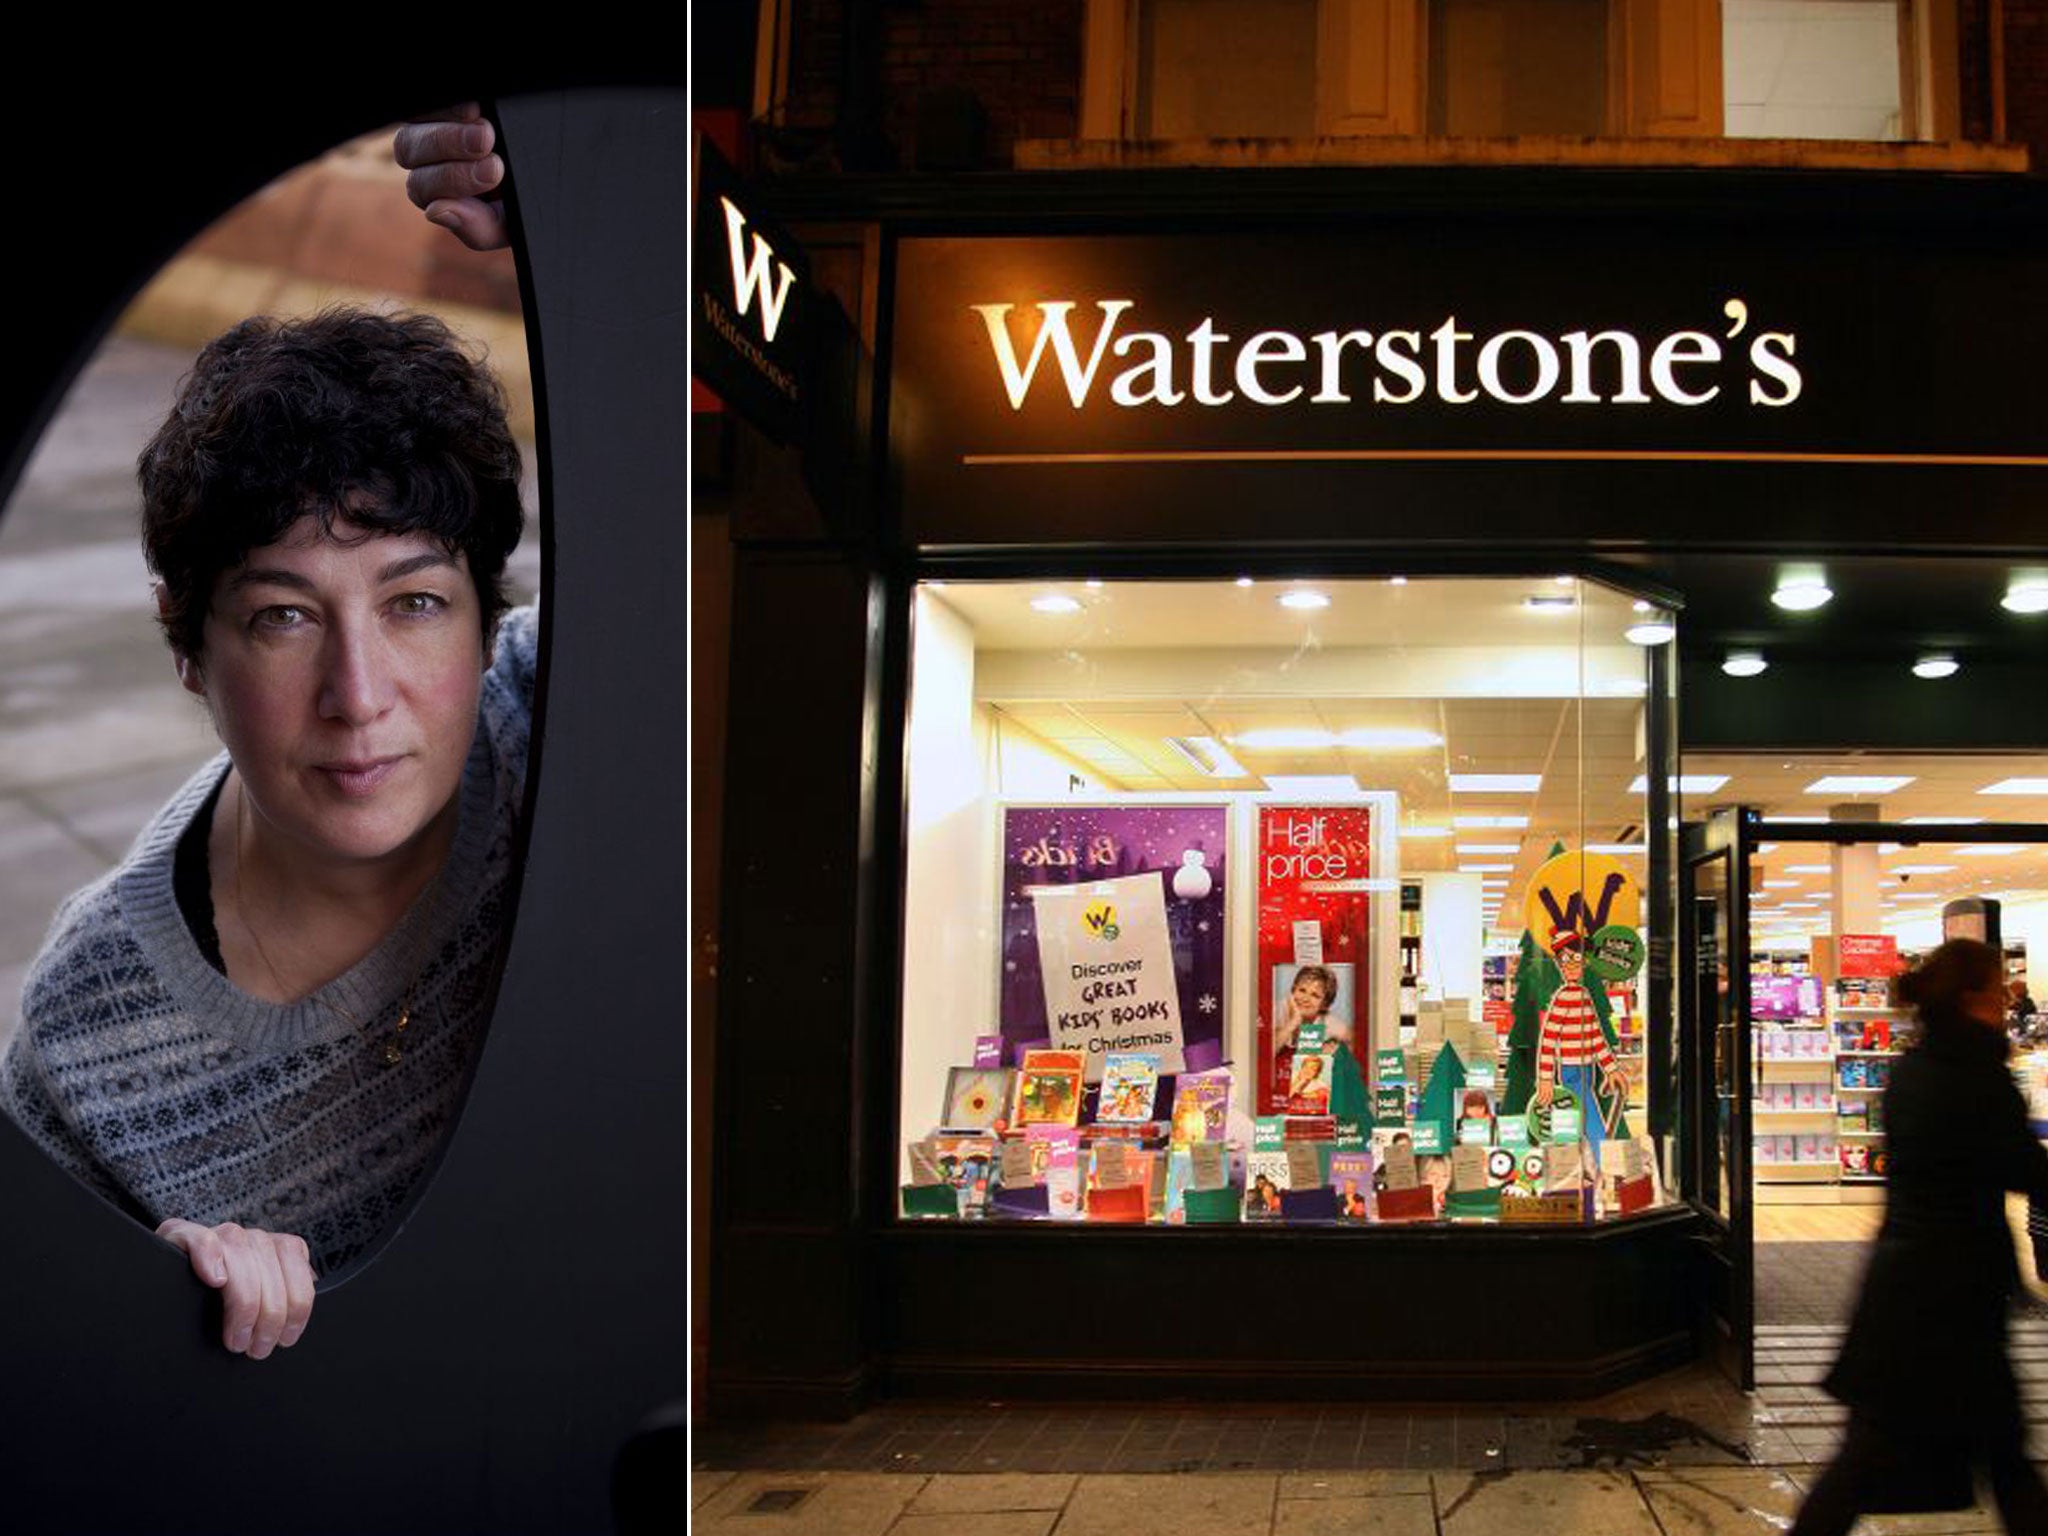 A Waterstone's store and Joanne Harris